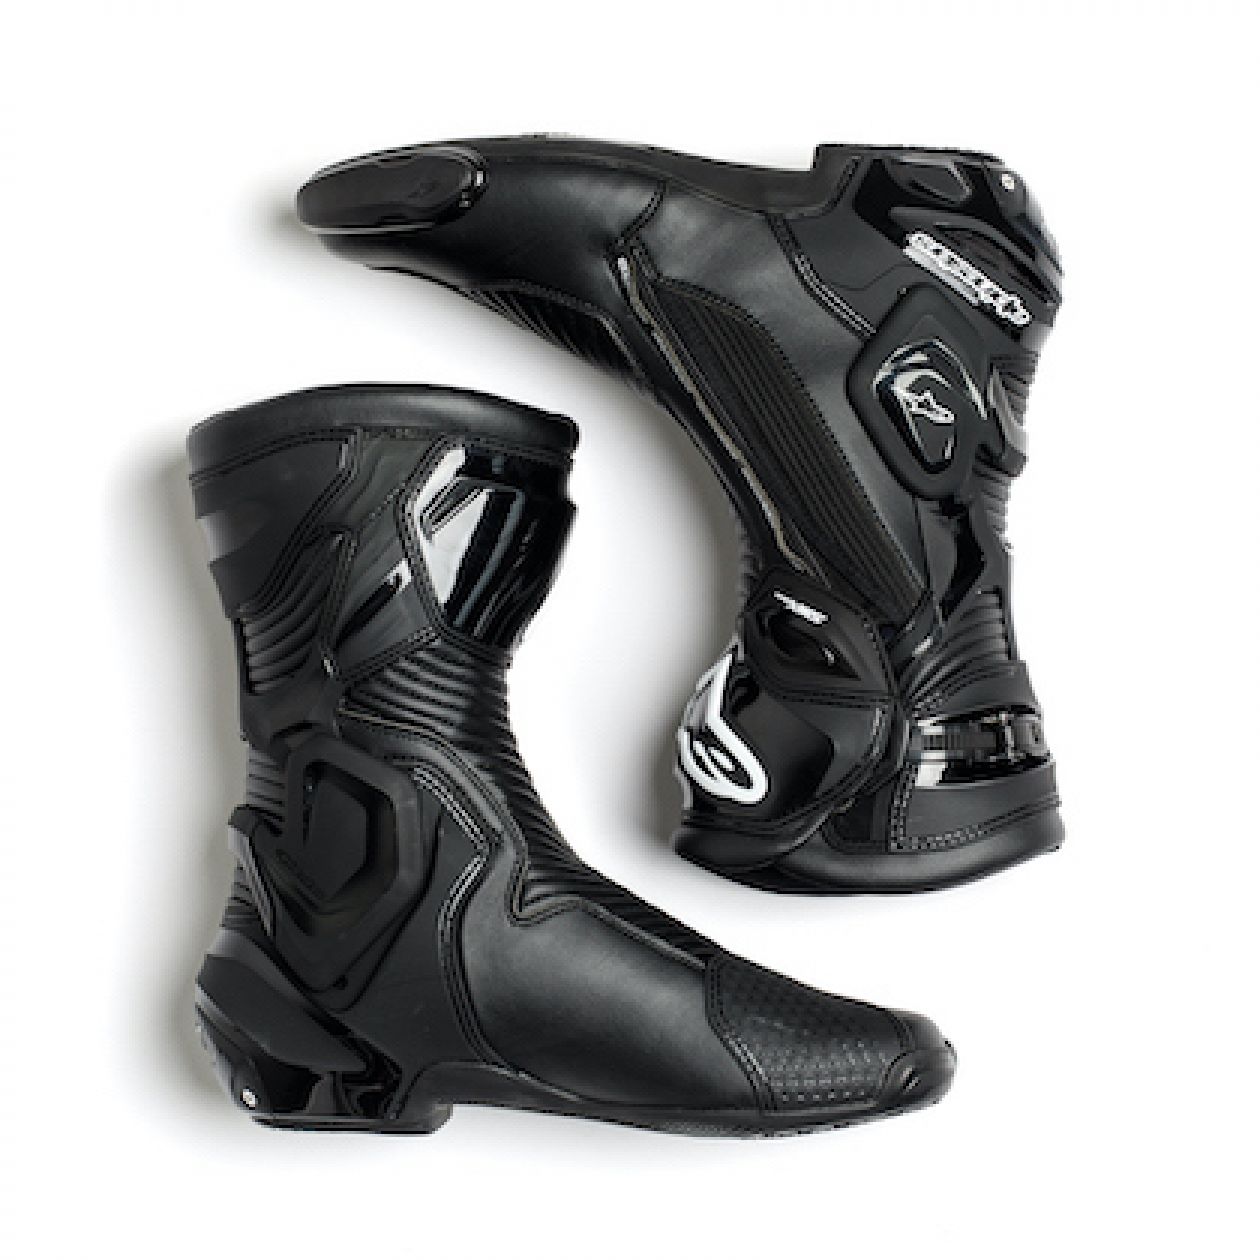 most protective motorcycle boots